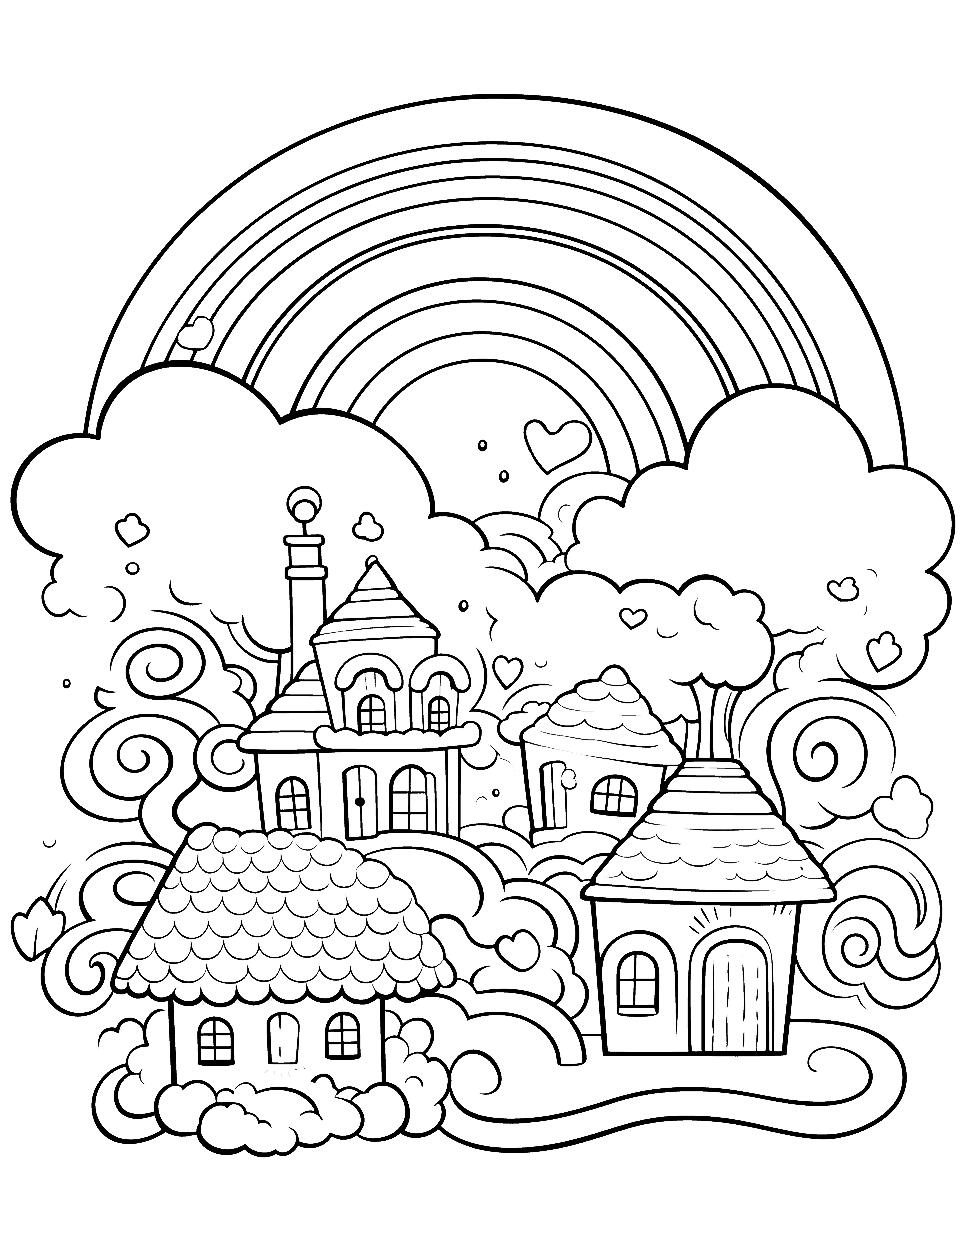 Rainbow Candy Land Coloring Page - A whimsical candy land with rainbow-colored treats.